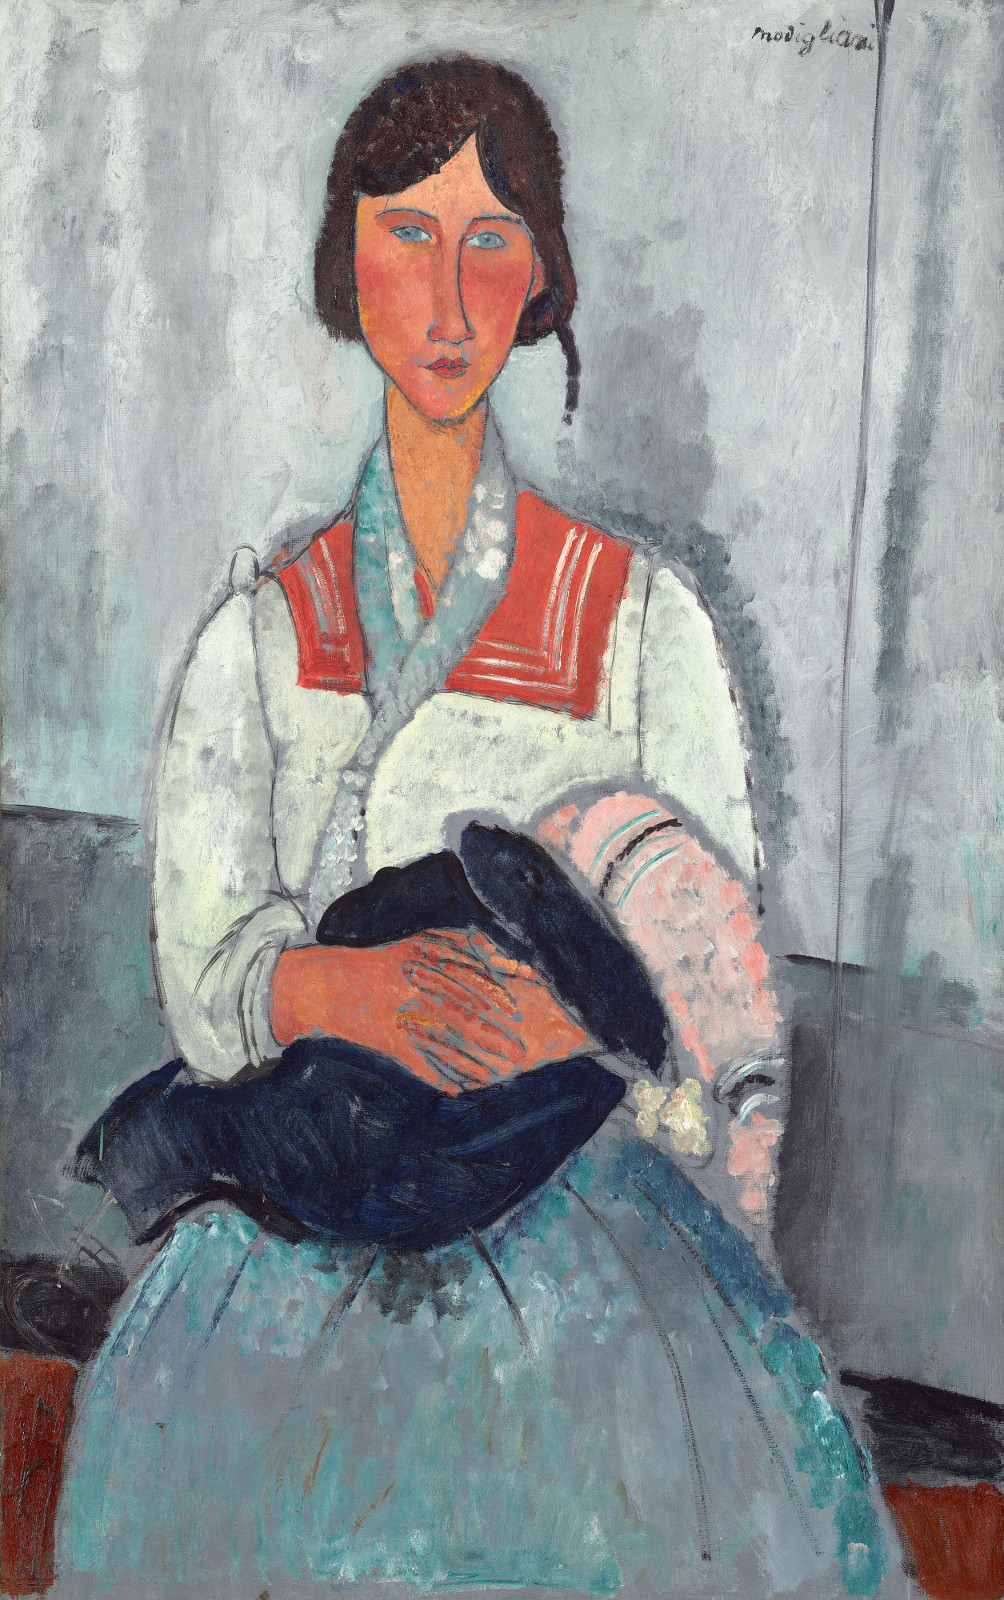 Fig. 6 – Gipsy Woman with Baby, Amedeo Modigliani, 1919, oil on canvas, 115.9 x 73 cm. National Gallery of Art, Washington. Chester Dale Collection.